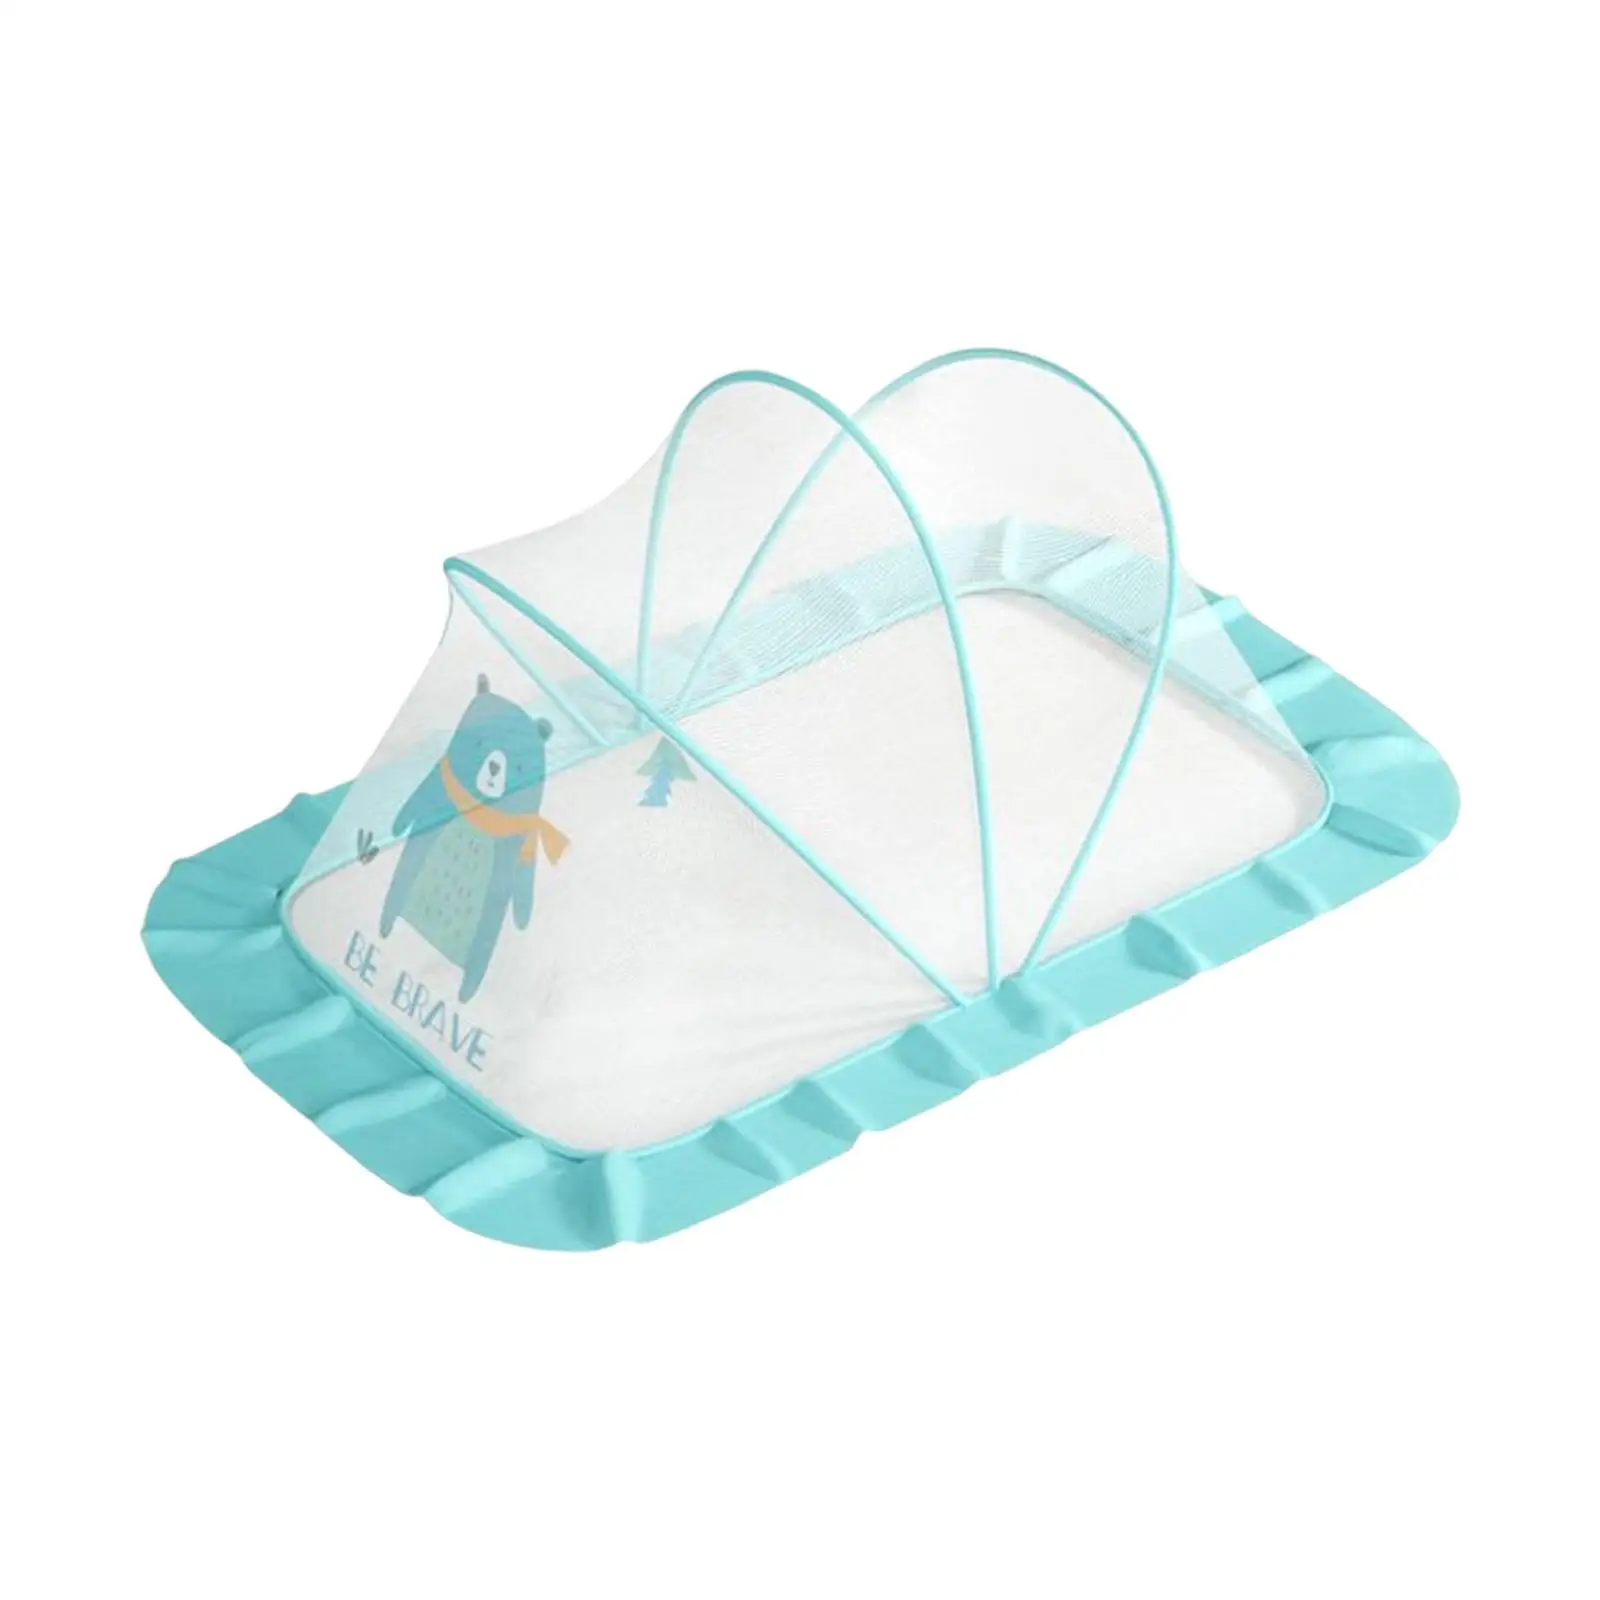 Portable Baby Cots Net, High Density Grids , Foldable for Toddlers